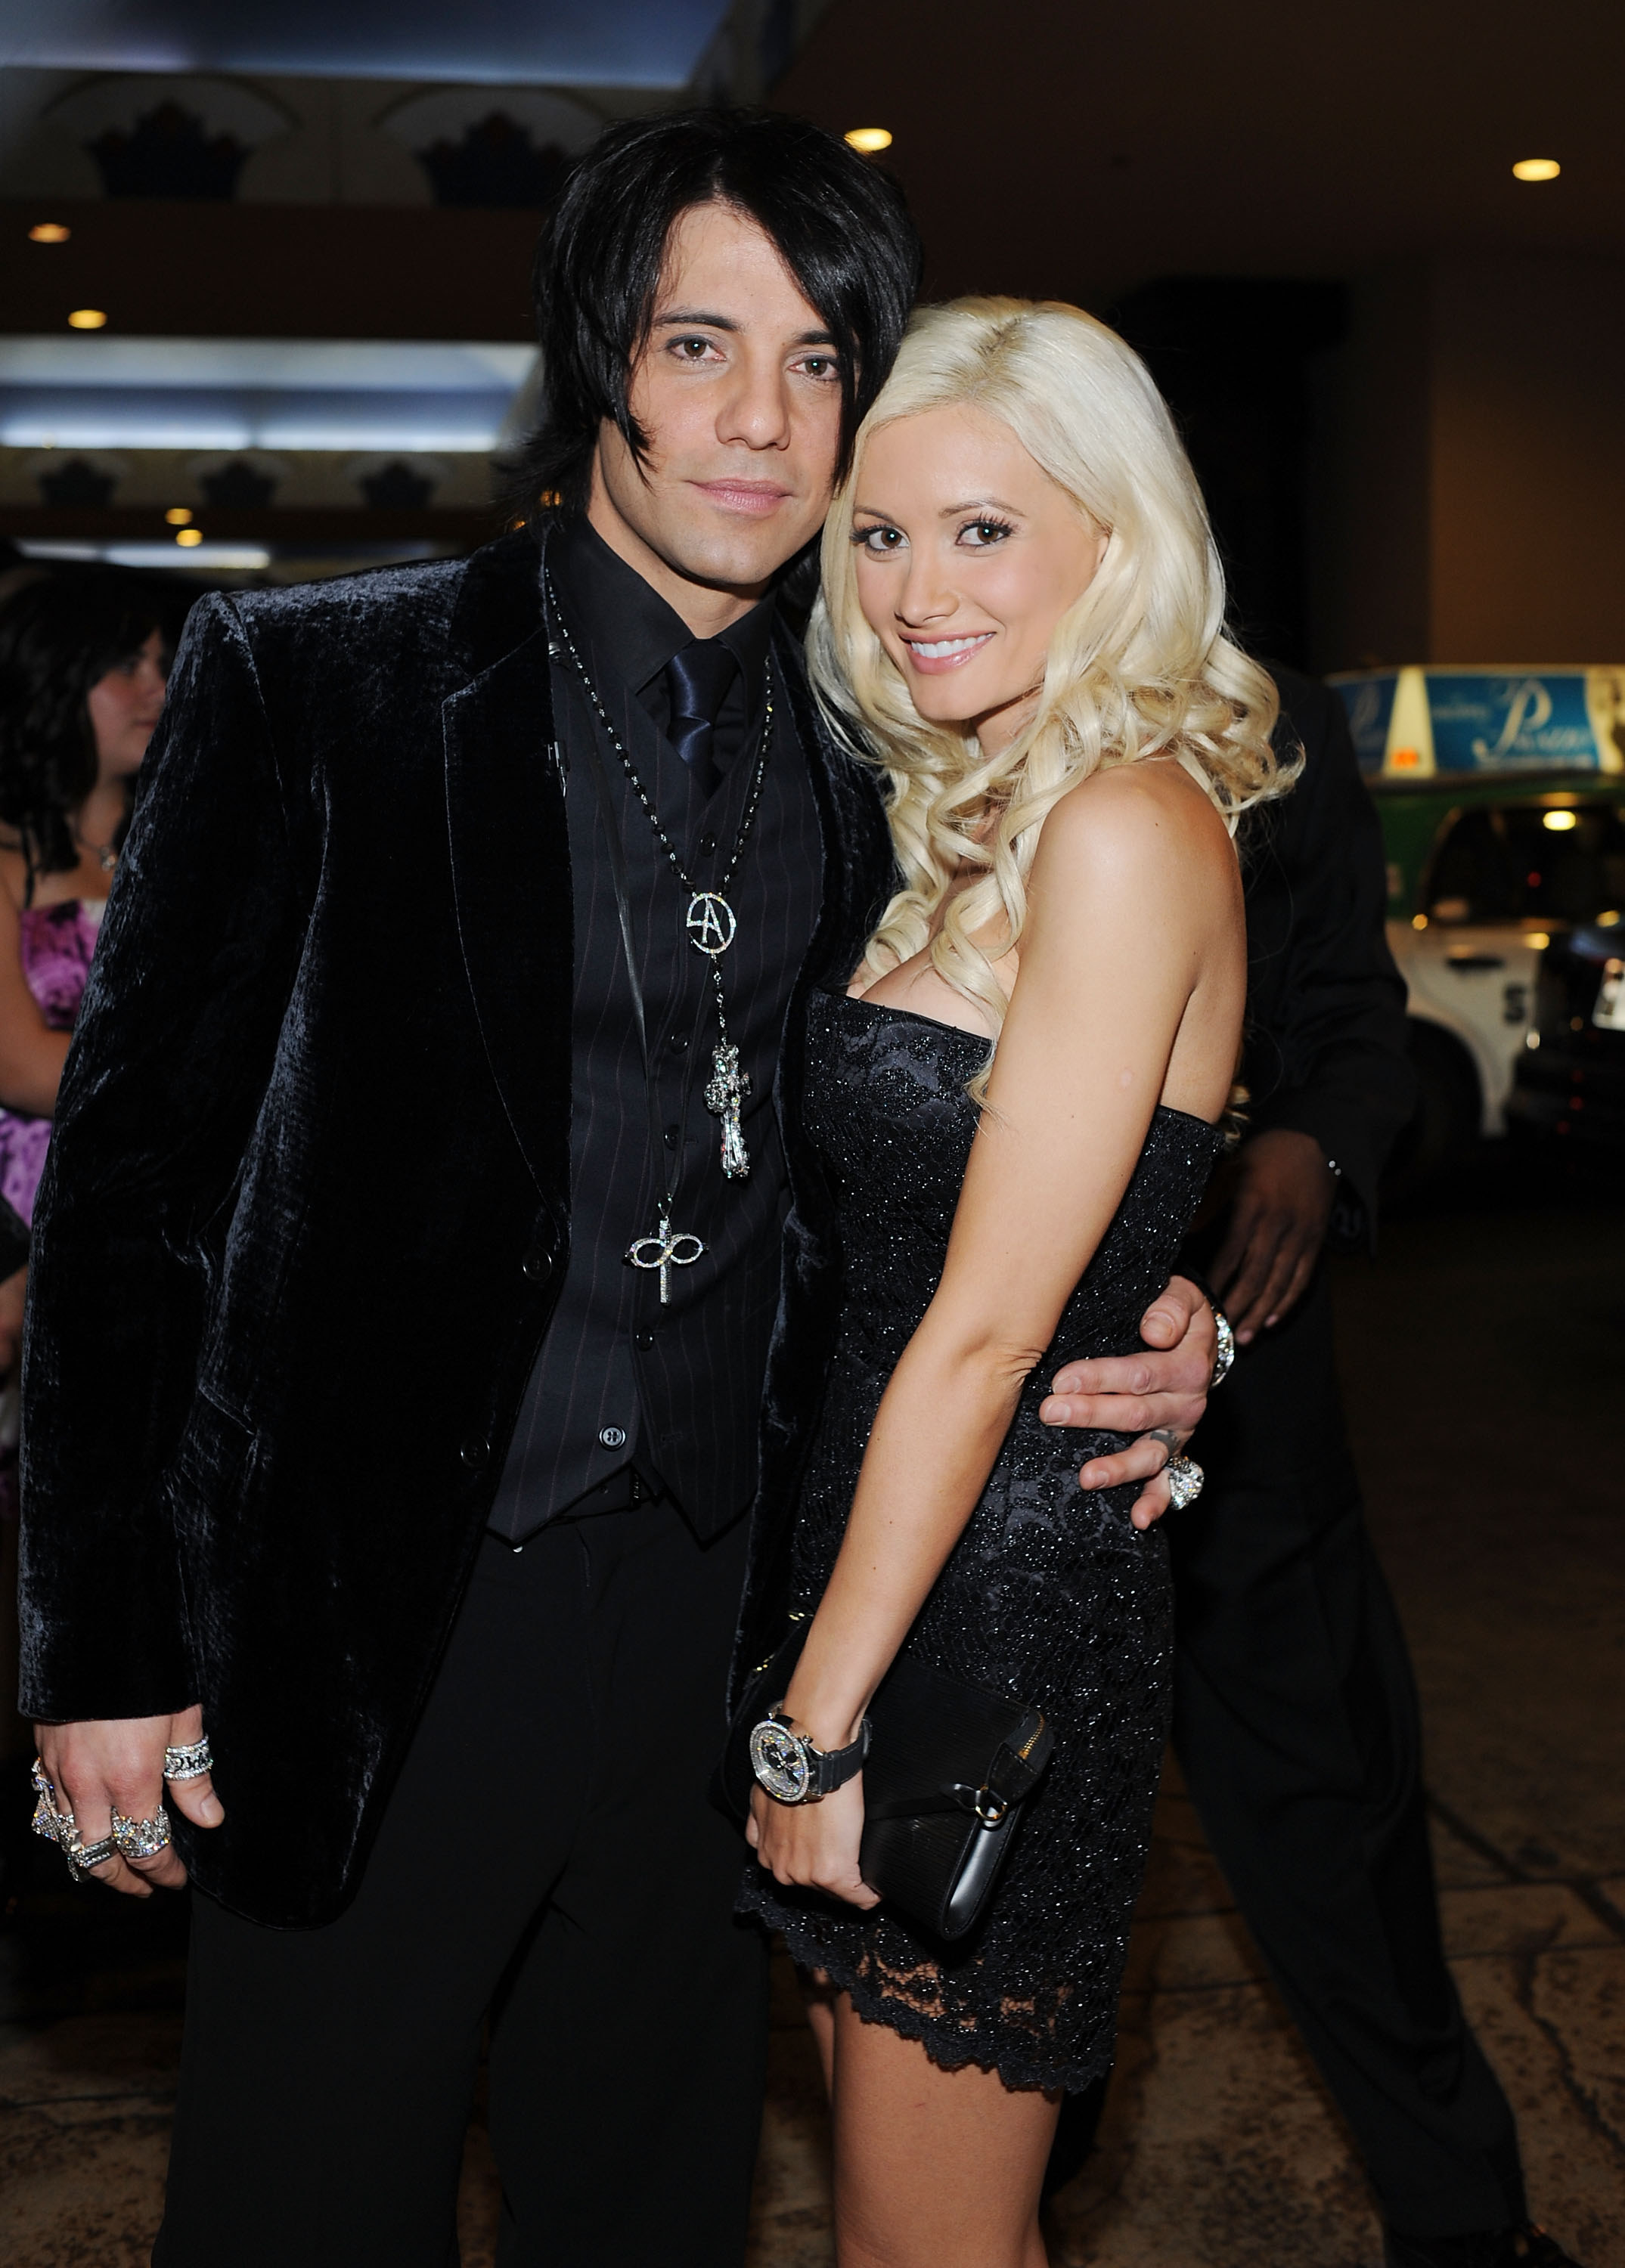 Criss Angel and Holly Madison arrive at the Gala Premiere of Criss Angel Believe by Cirque Du Soleil at the Luxor Hotel and Casino on October 31, 2008